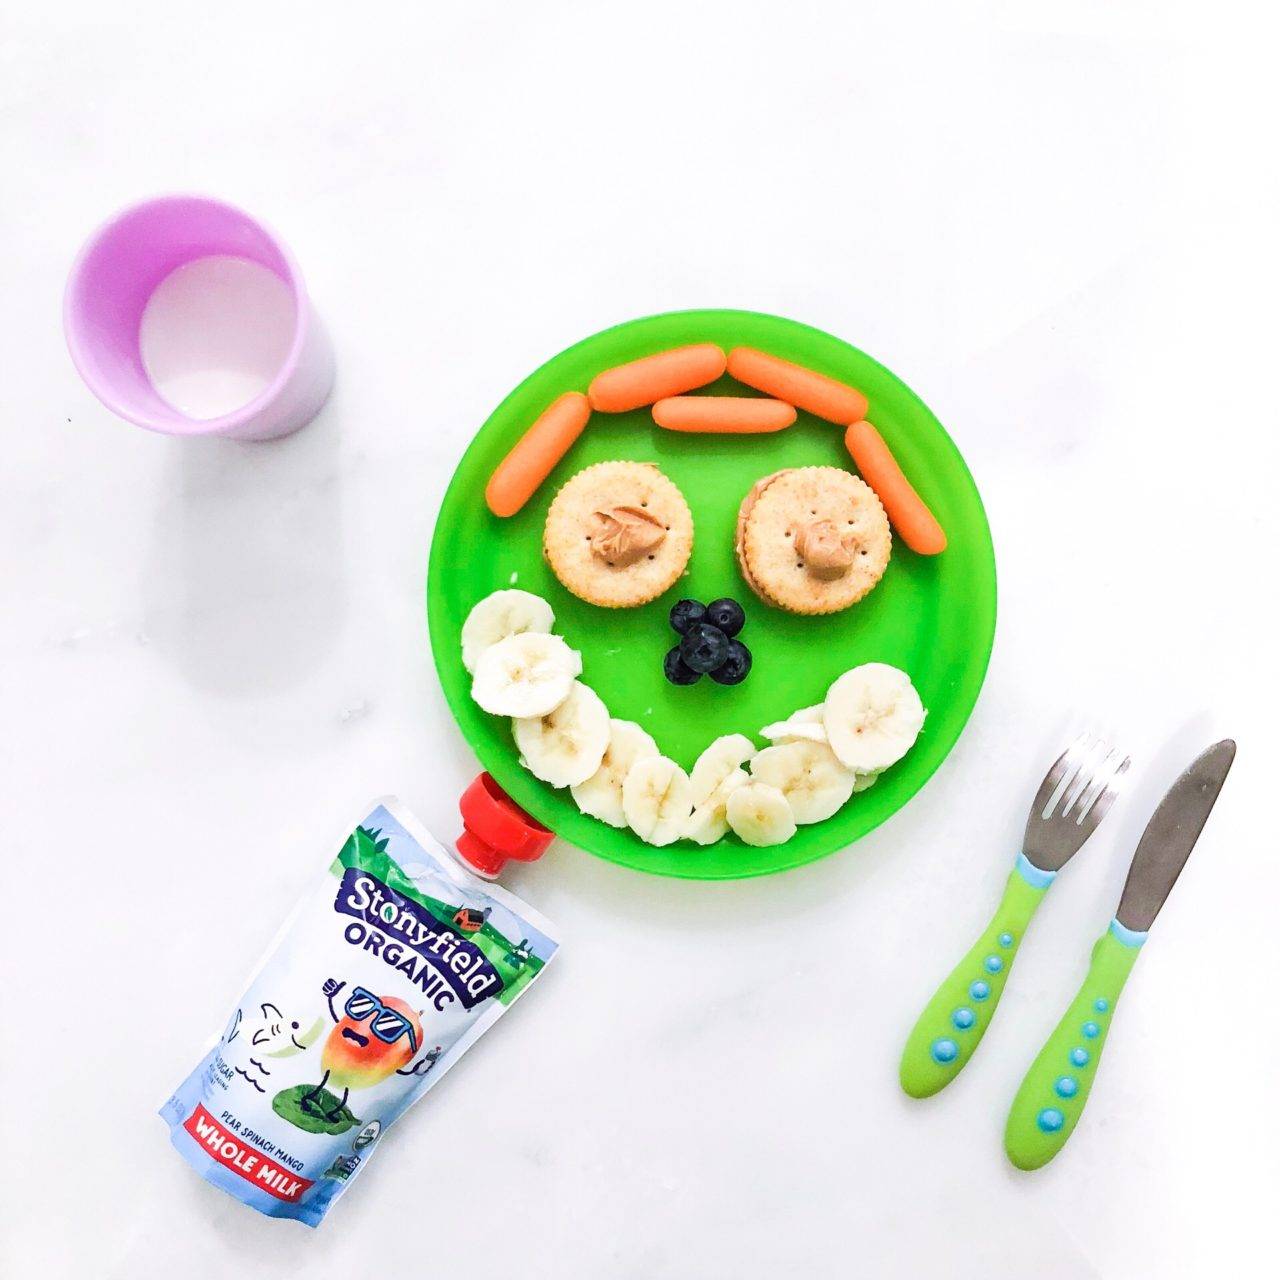 Feature in Chicago Parent Magazine: Healthy Lunch Options for Picky Eaters